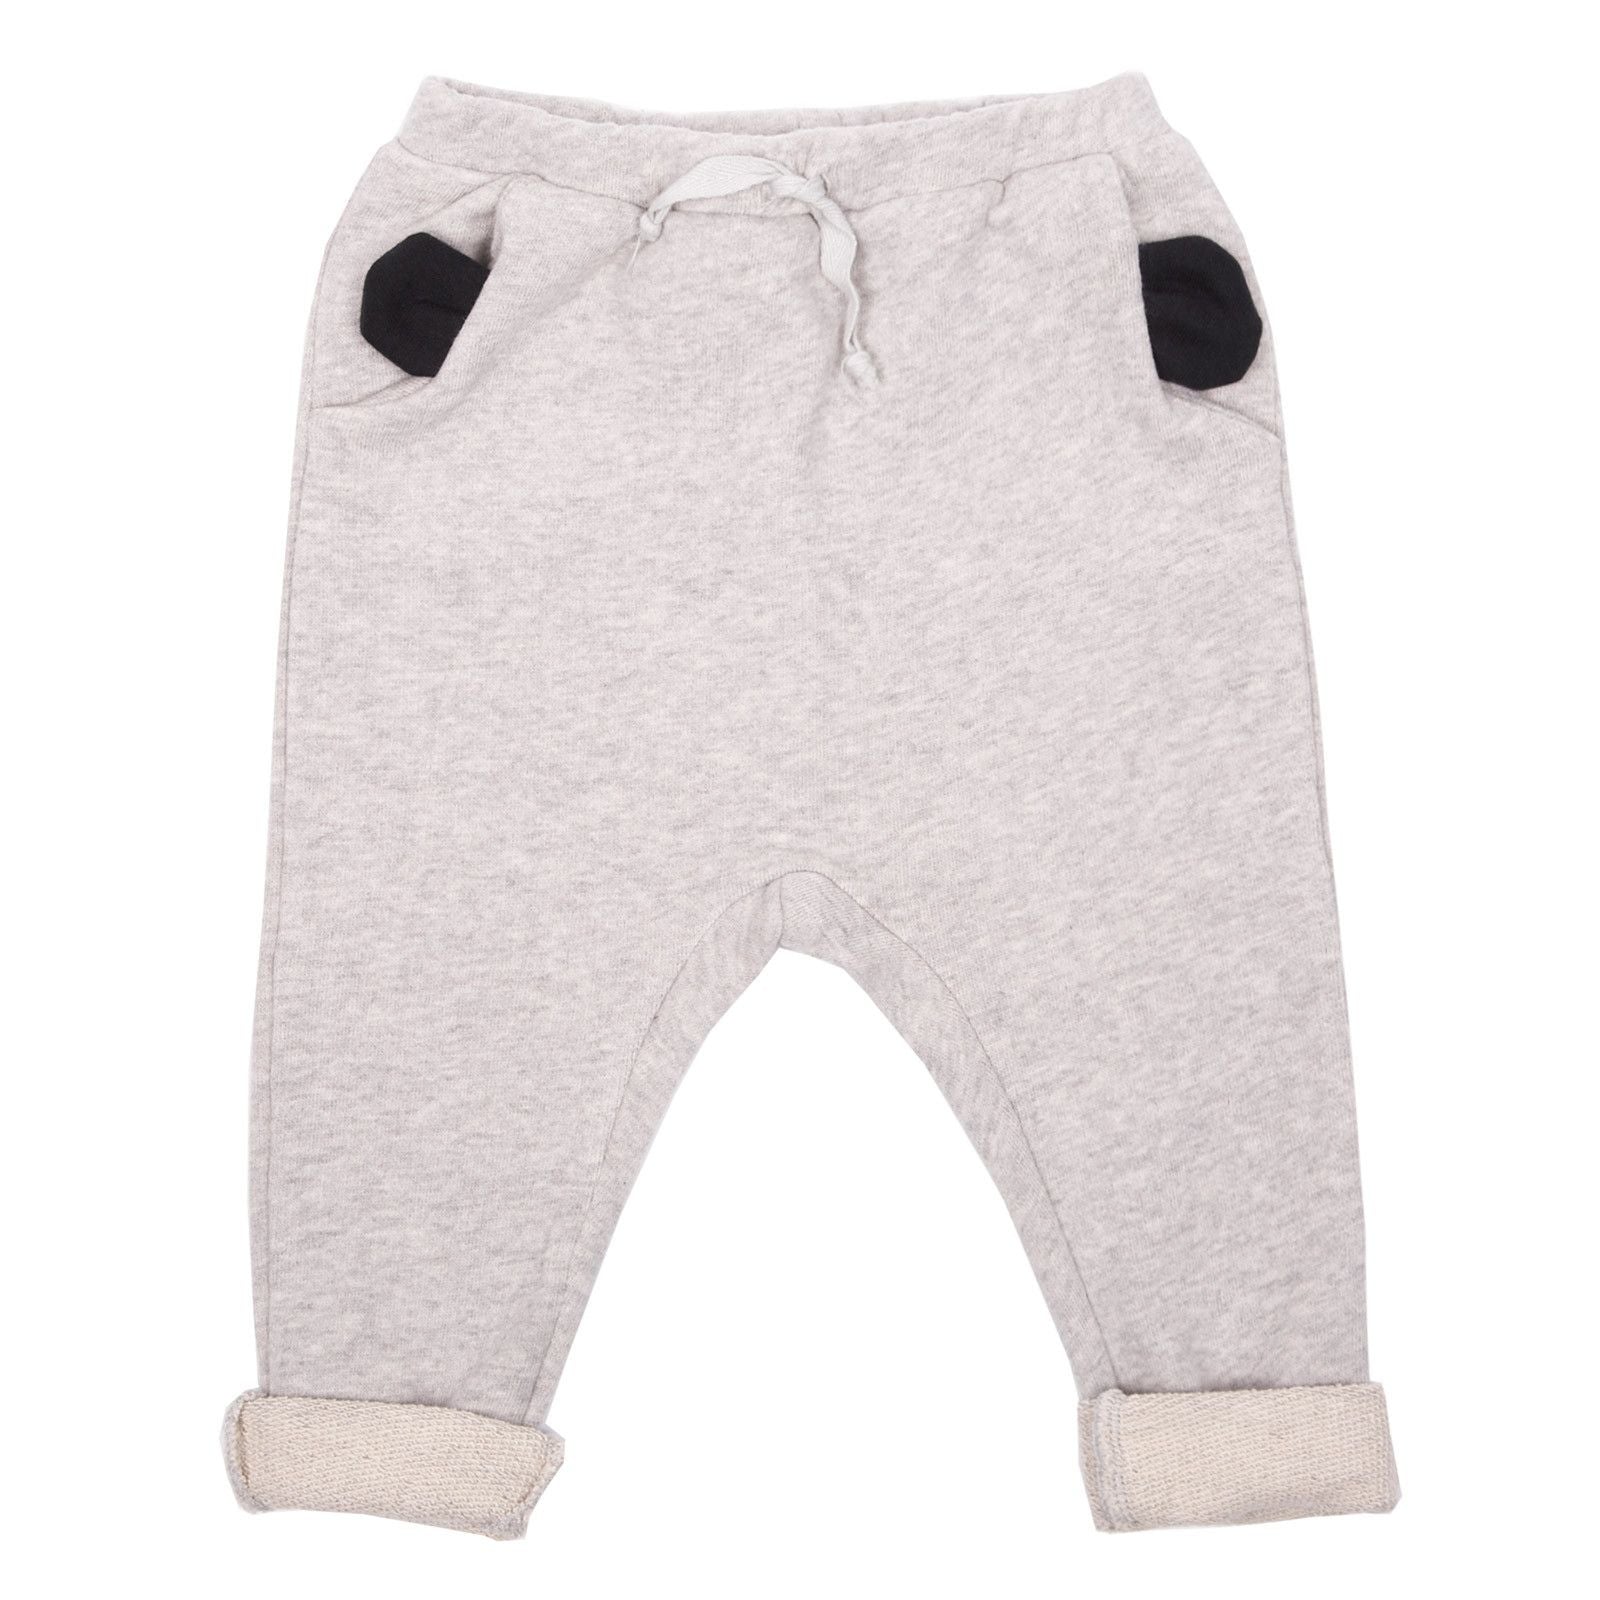 Baby Grey Cotton Trousers With Ear Trims Pockets - CÉMAROSE | Children's Fashion Store